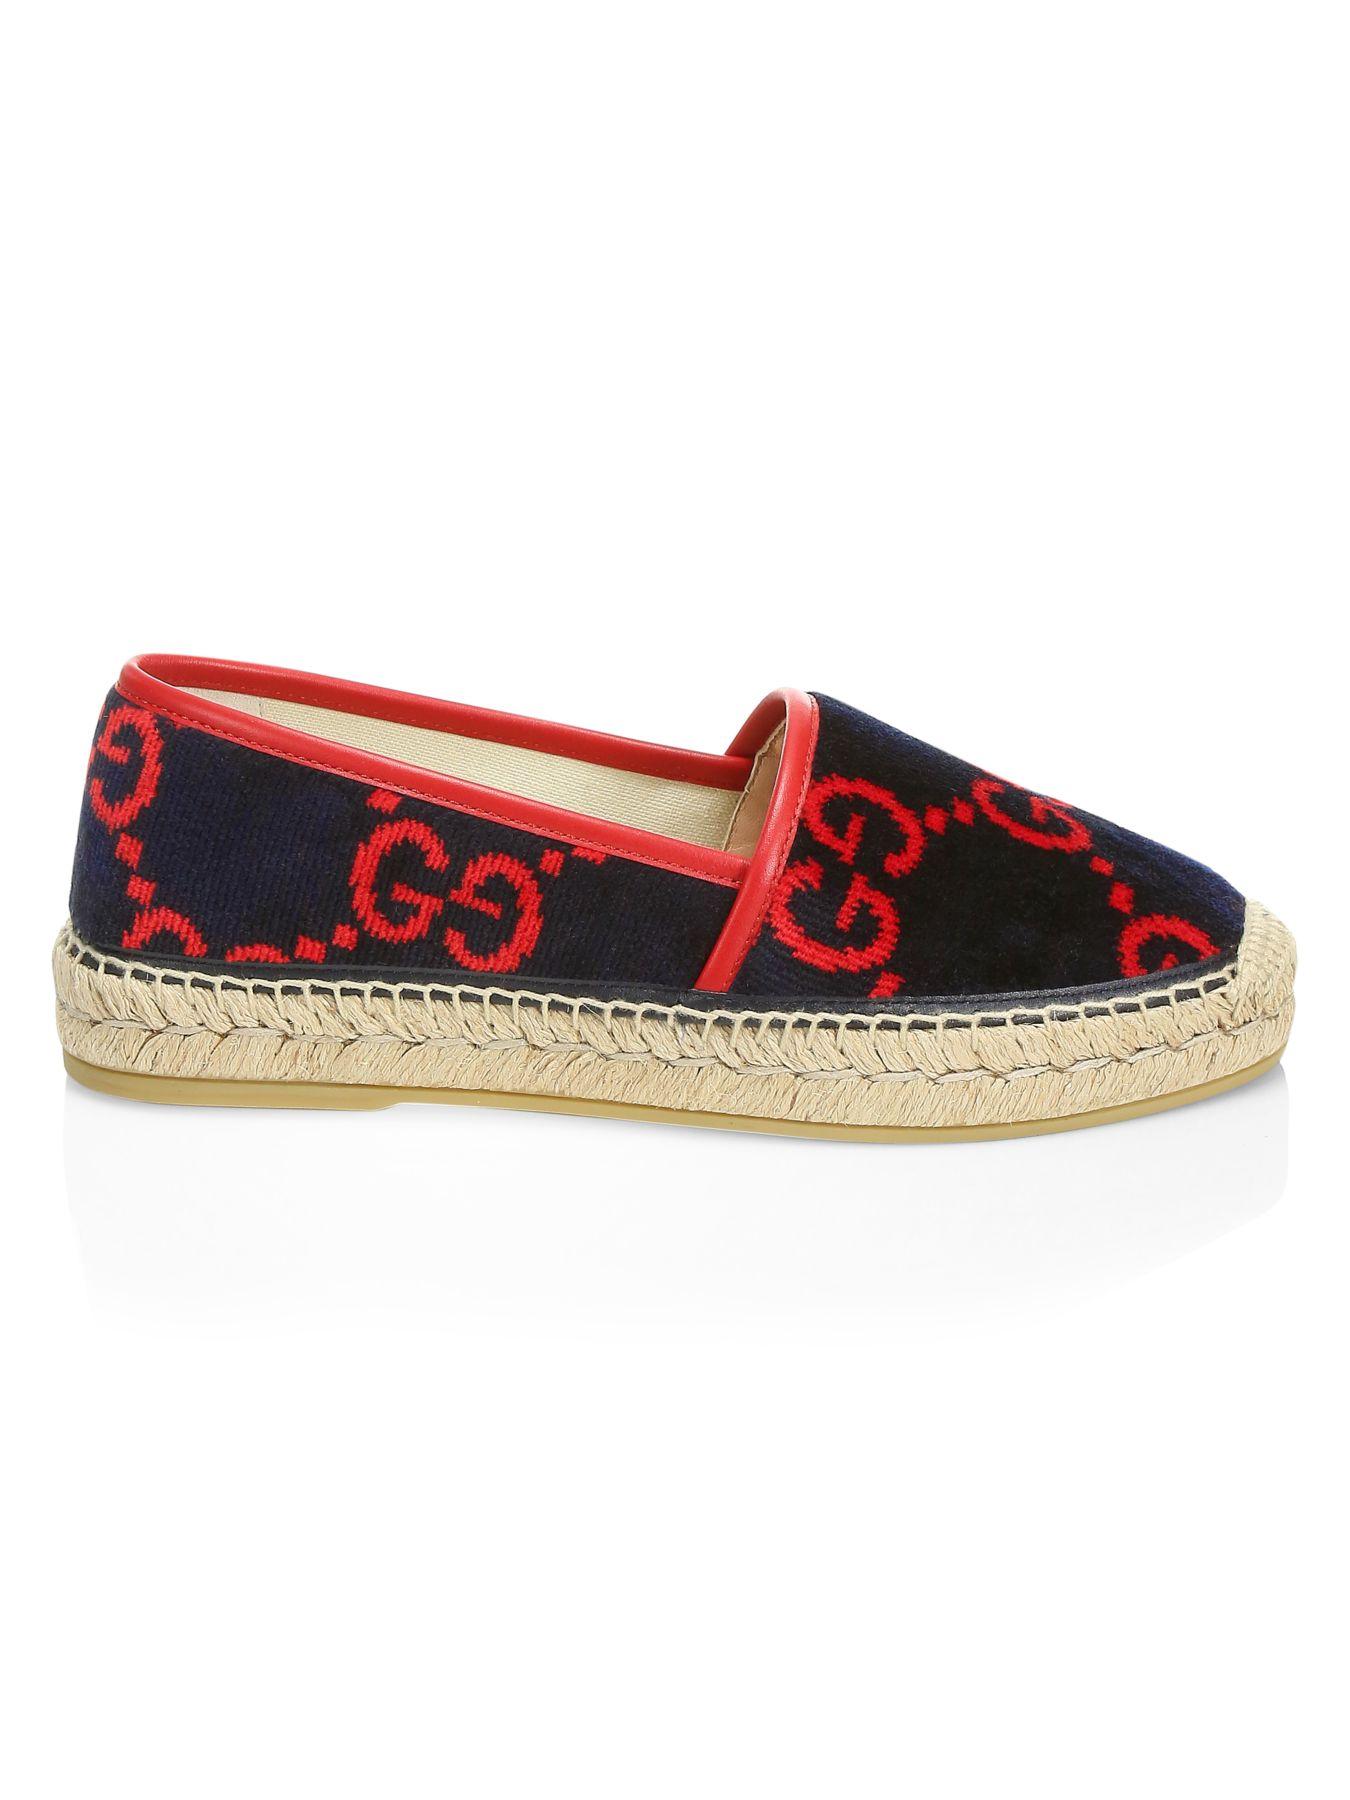 Gucci Leather Pilar Double G Logo Espadrille in Blue (Red) - Lyst